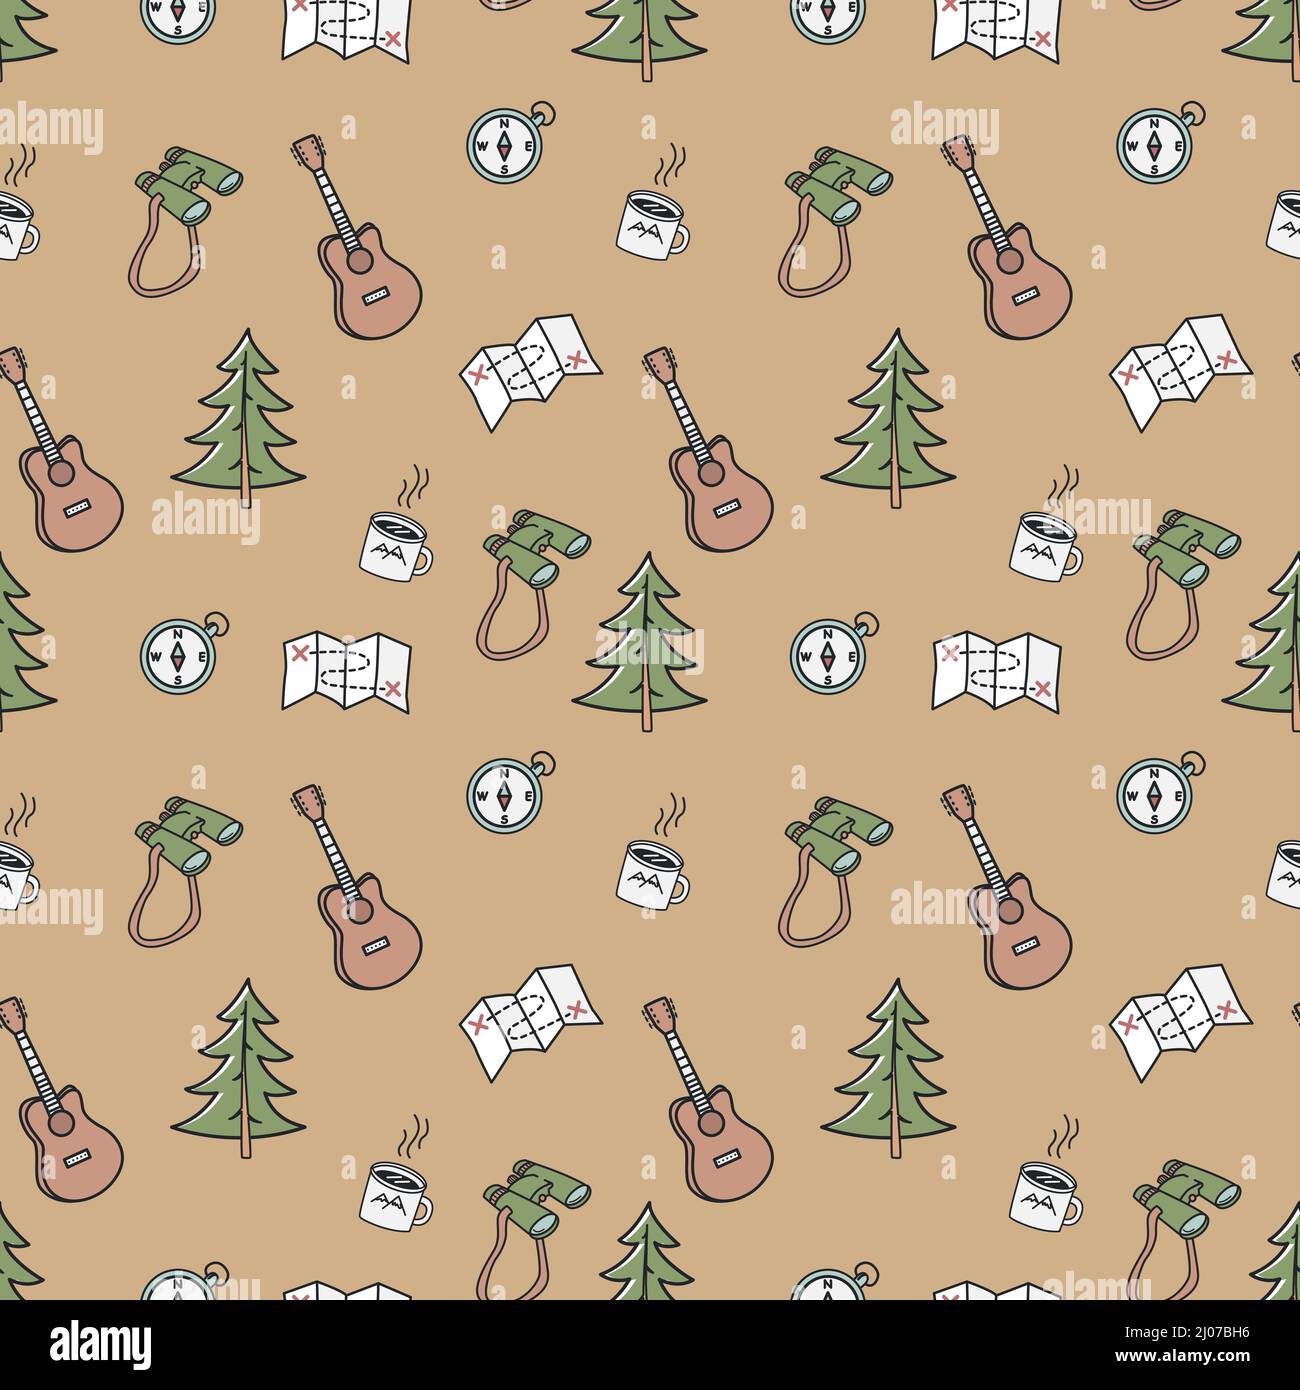 Camping elements, seamless pattern. Guitars, Christmas trees, binoculars and others. Flat vector illustration, for t-shirt prints, posters and other u Stock Vector